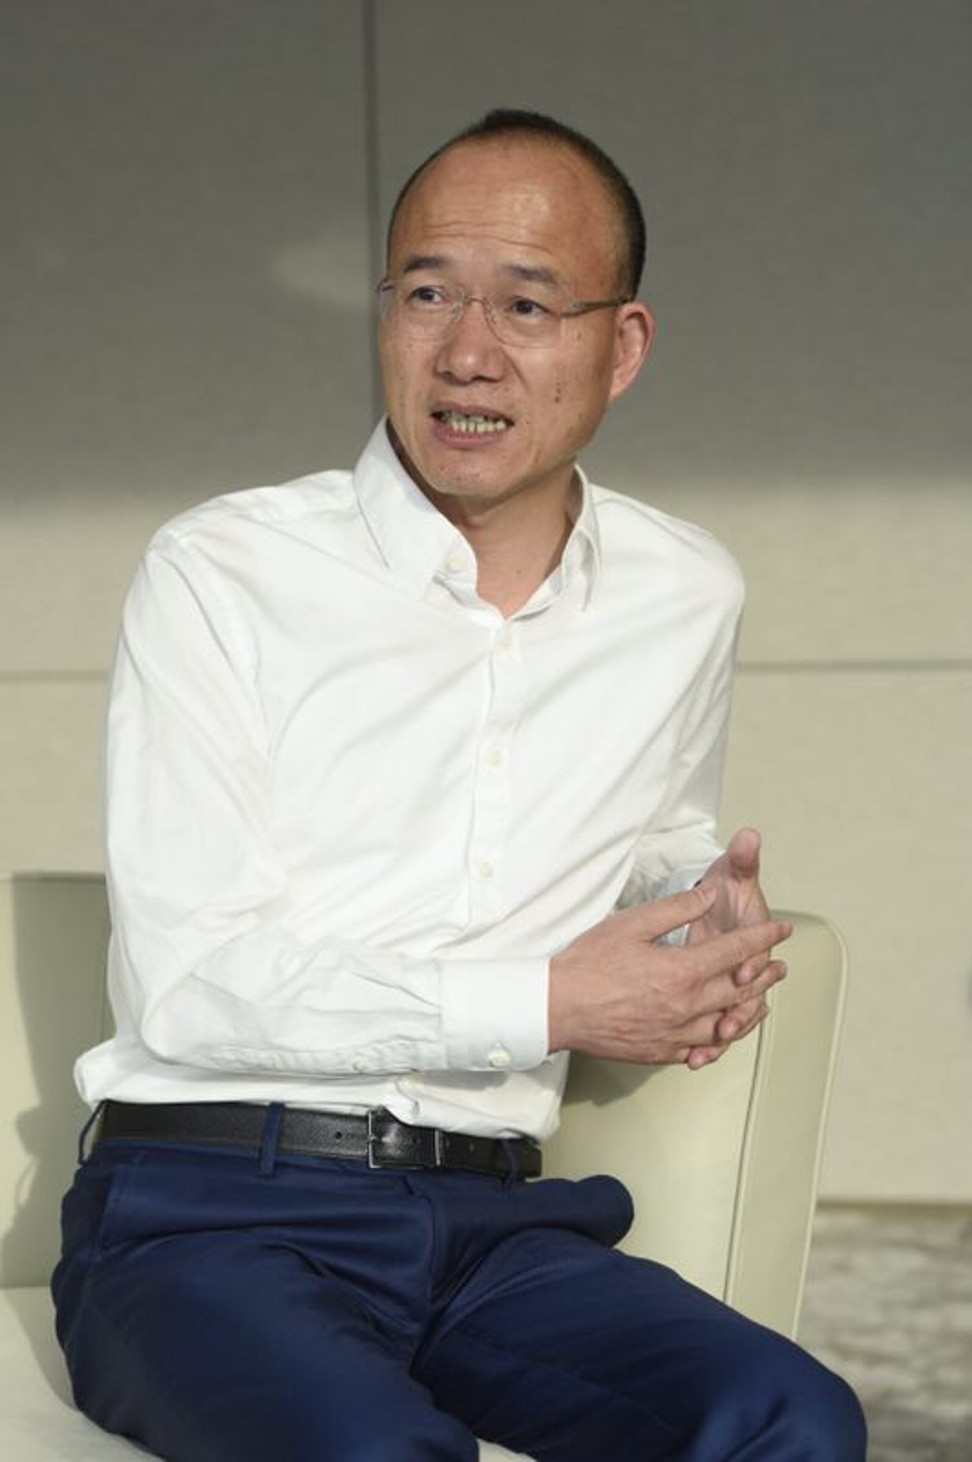 Fosun chairman Guo Guangchang in an exclusive interview with South China Morning Post in Shanghai. Photo: SCMP/Thierry Coulon